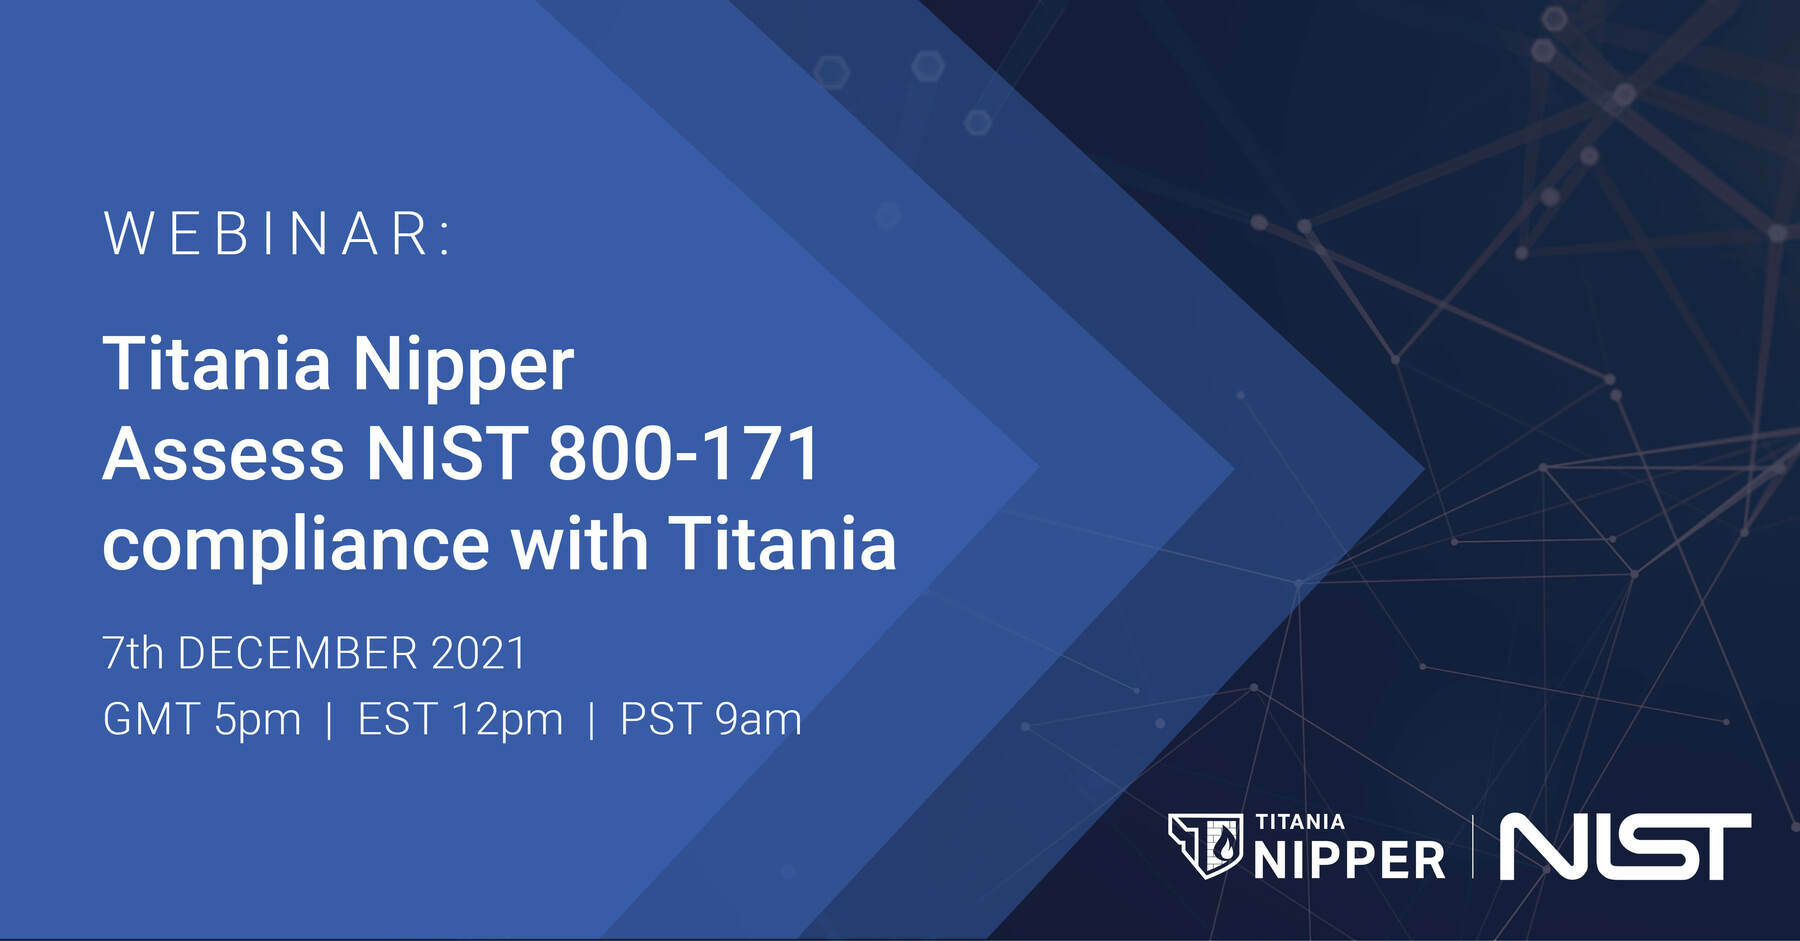 Assess NIST SP 800-171 Compliance with Titania Nipper